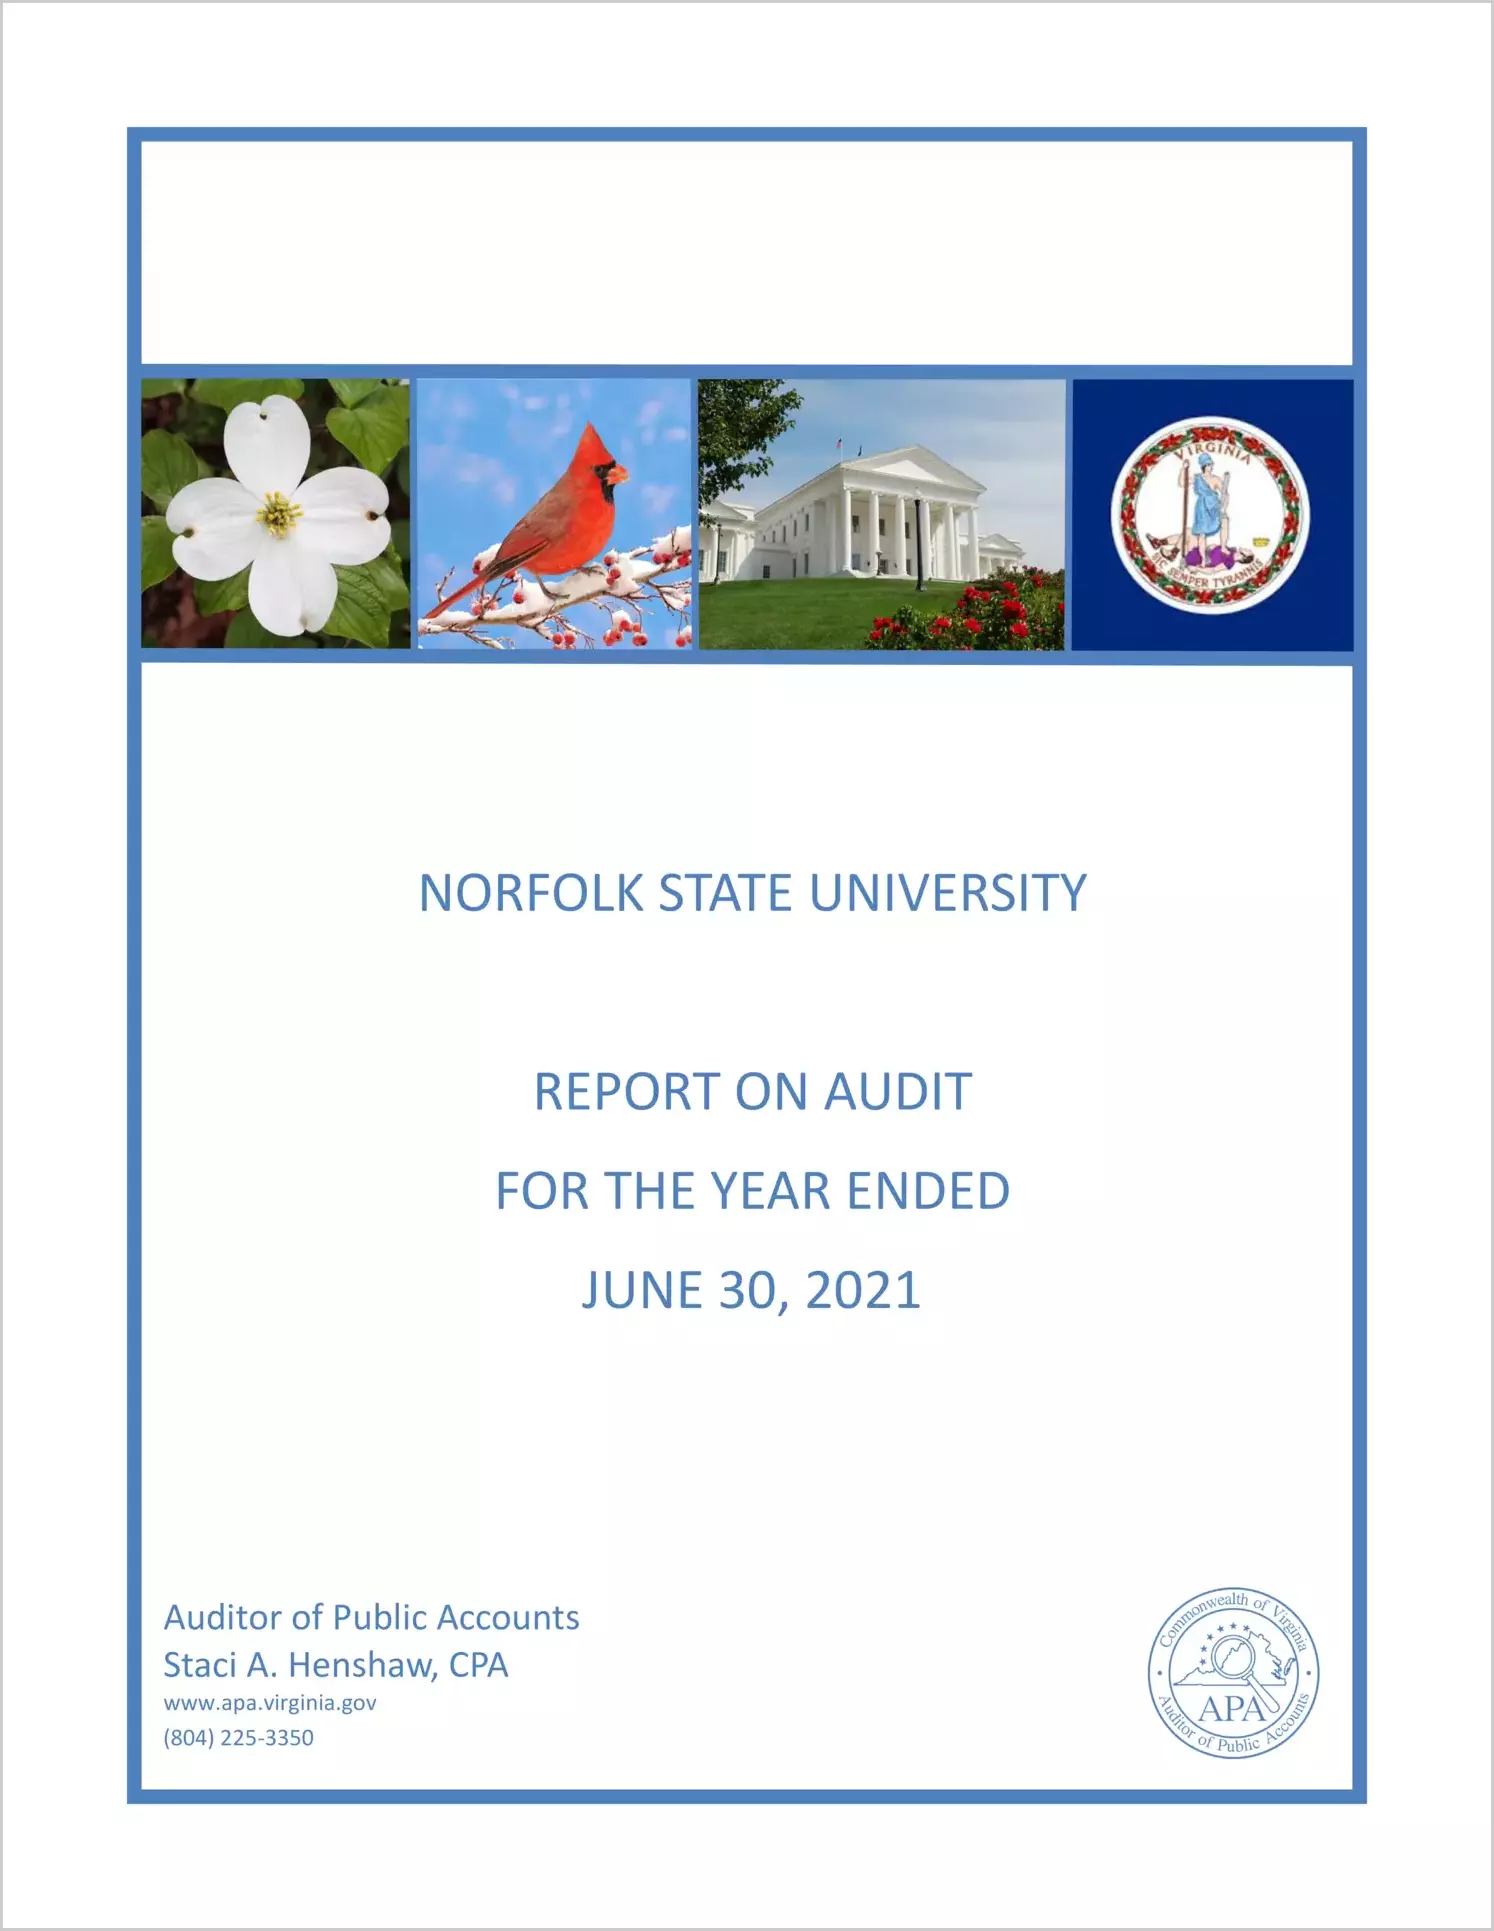 Norfolk State University for the year ended June 30, 2021